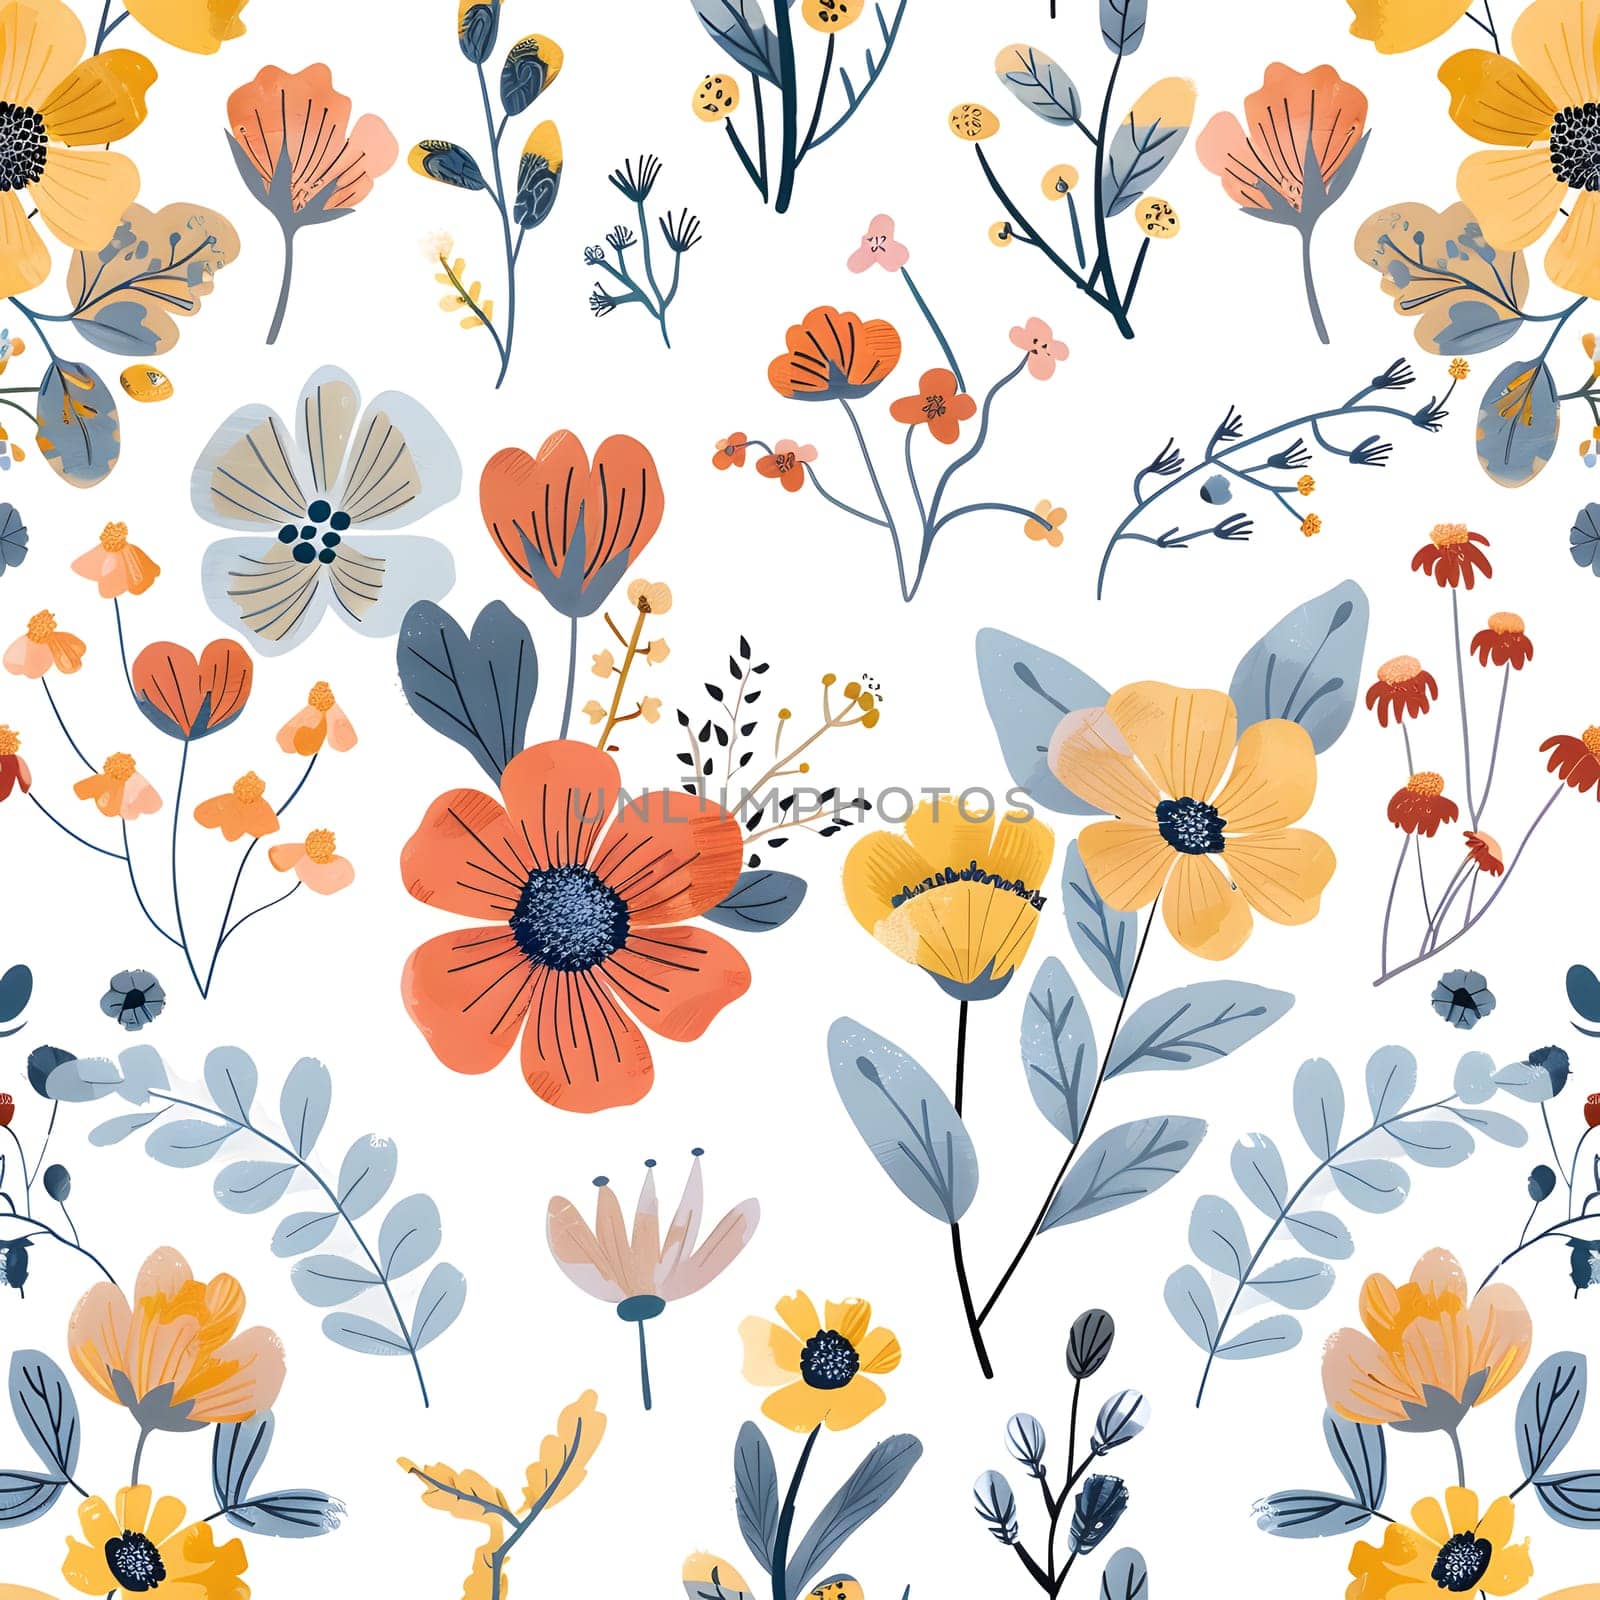 A creative arts design with a seamless pattern of orange flowers and leaves on a white background, forming a beautiful floral motif. Perfect for textiles or art projects